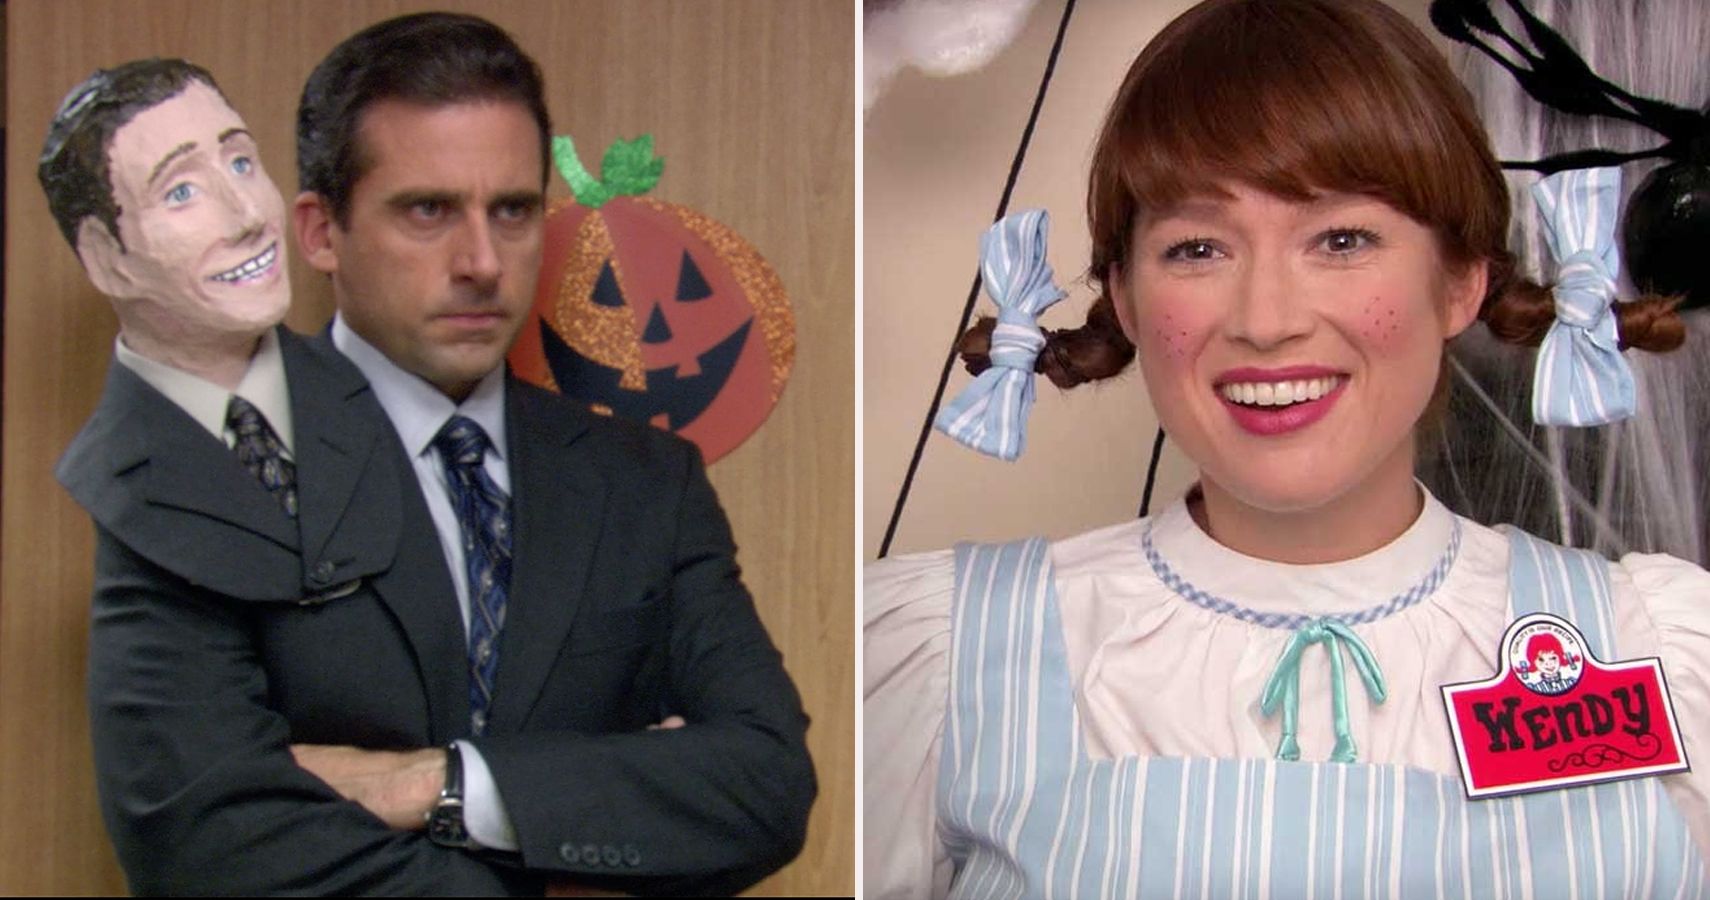 The Office: 10 Best Costumes From The Halloween Episodes